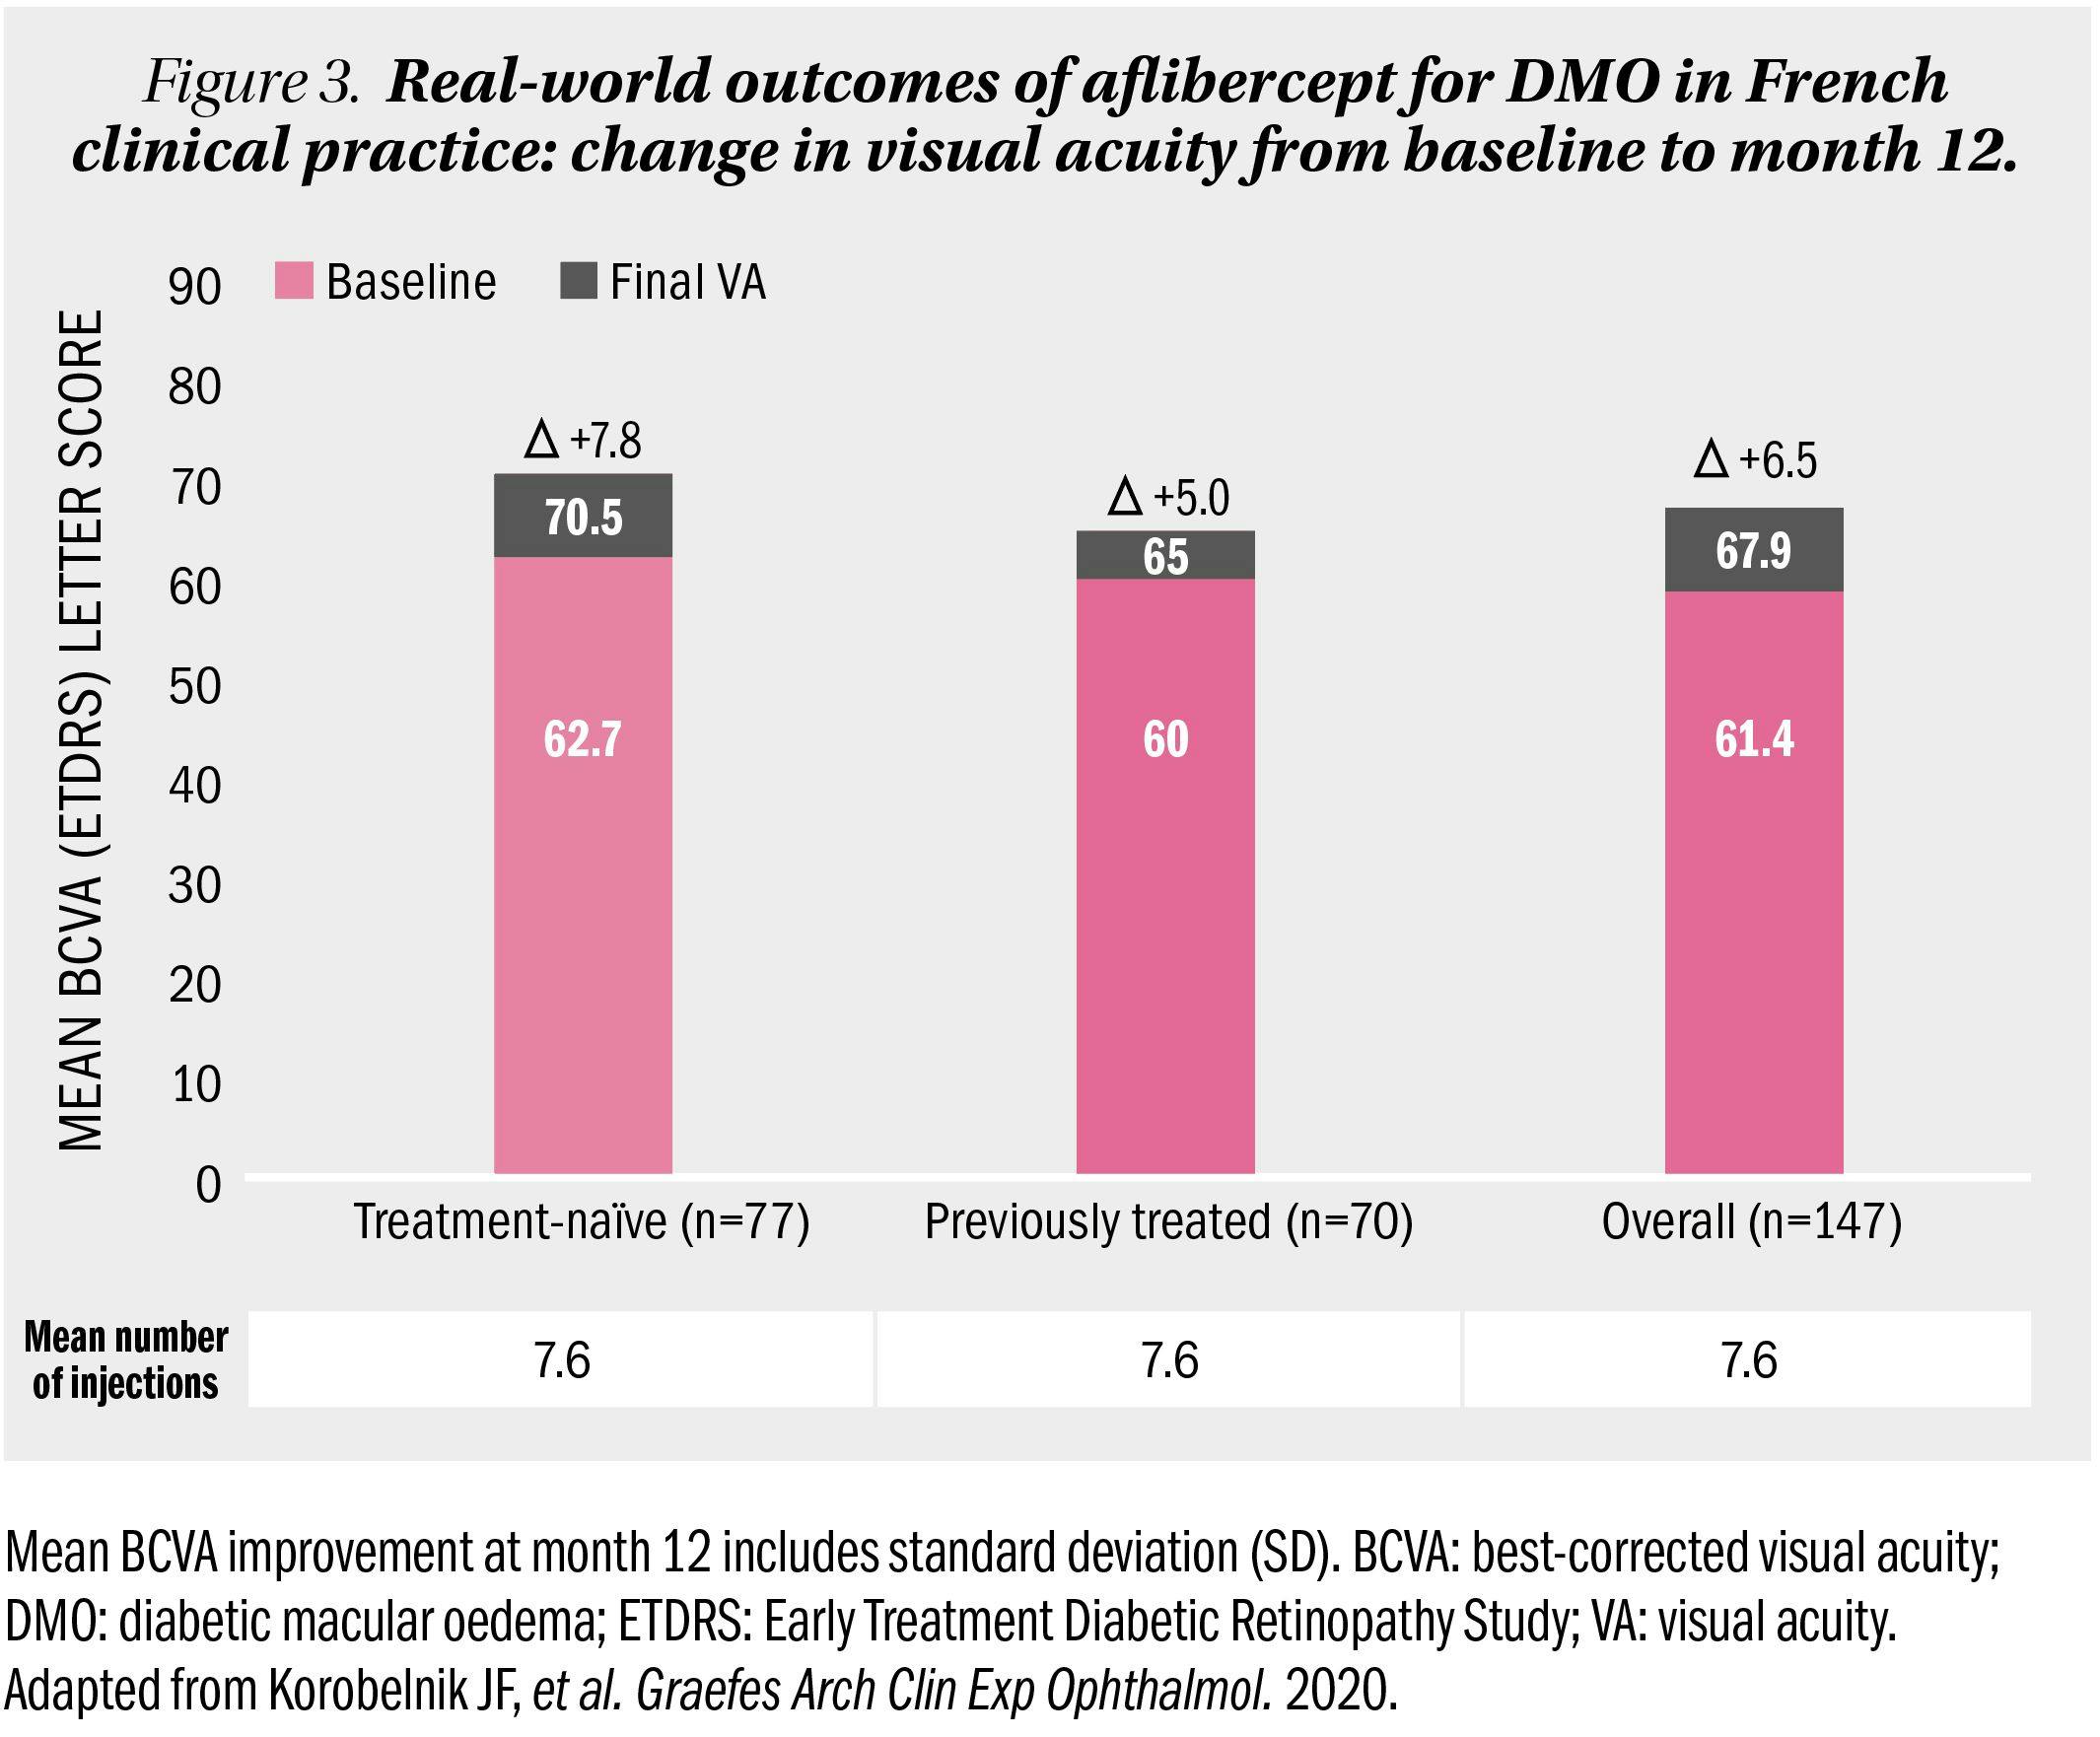 chart showing real-world outcomes, change in visual acuity from baseline to month 12